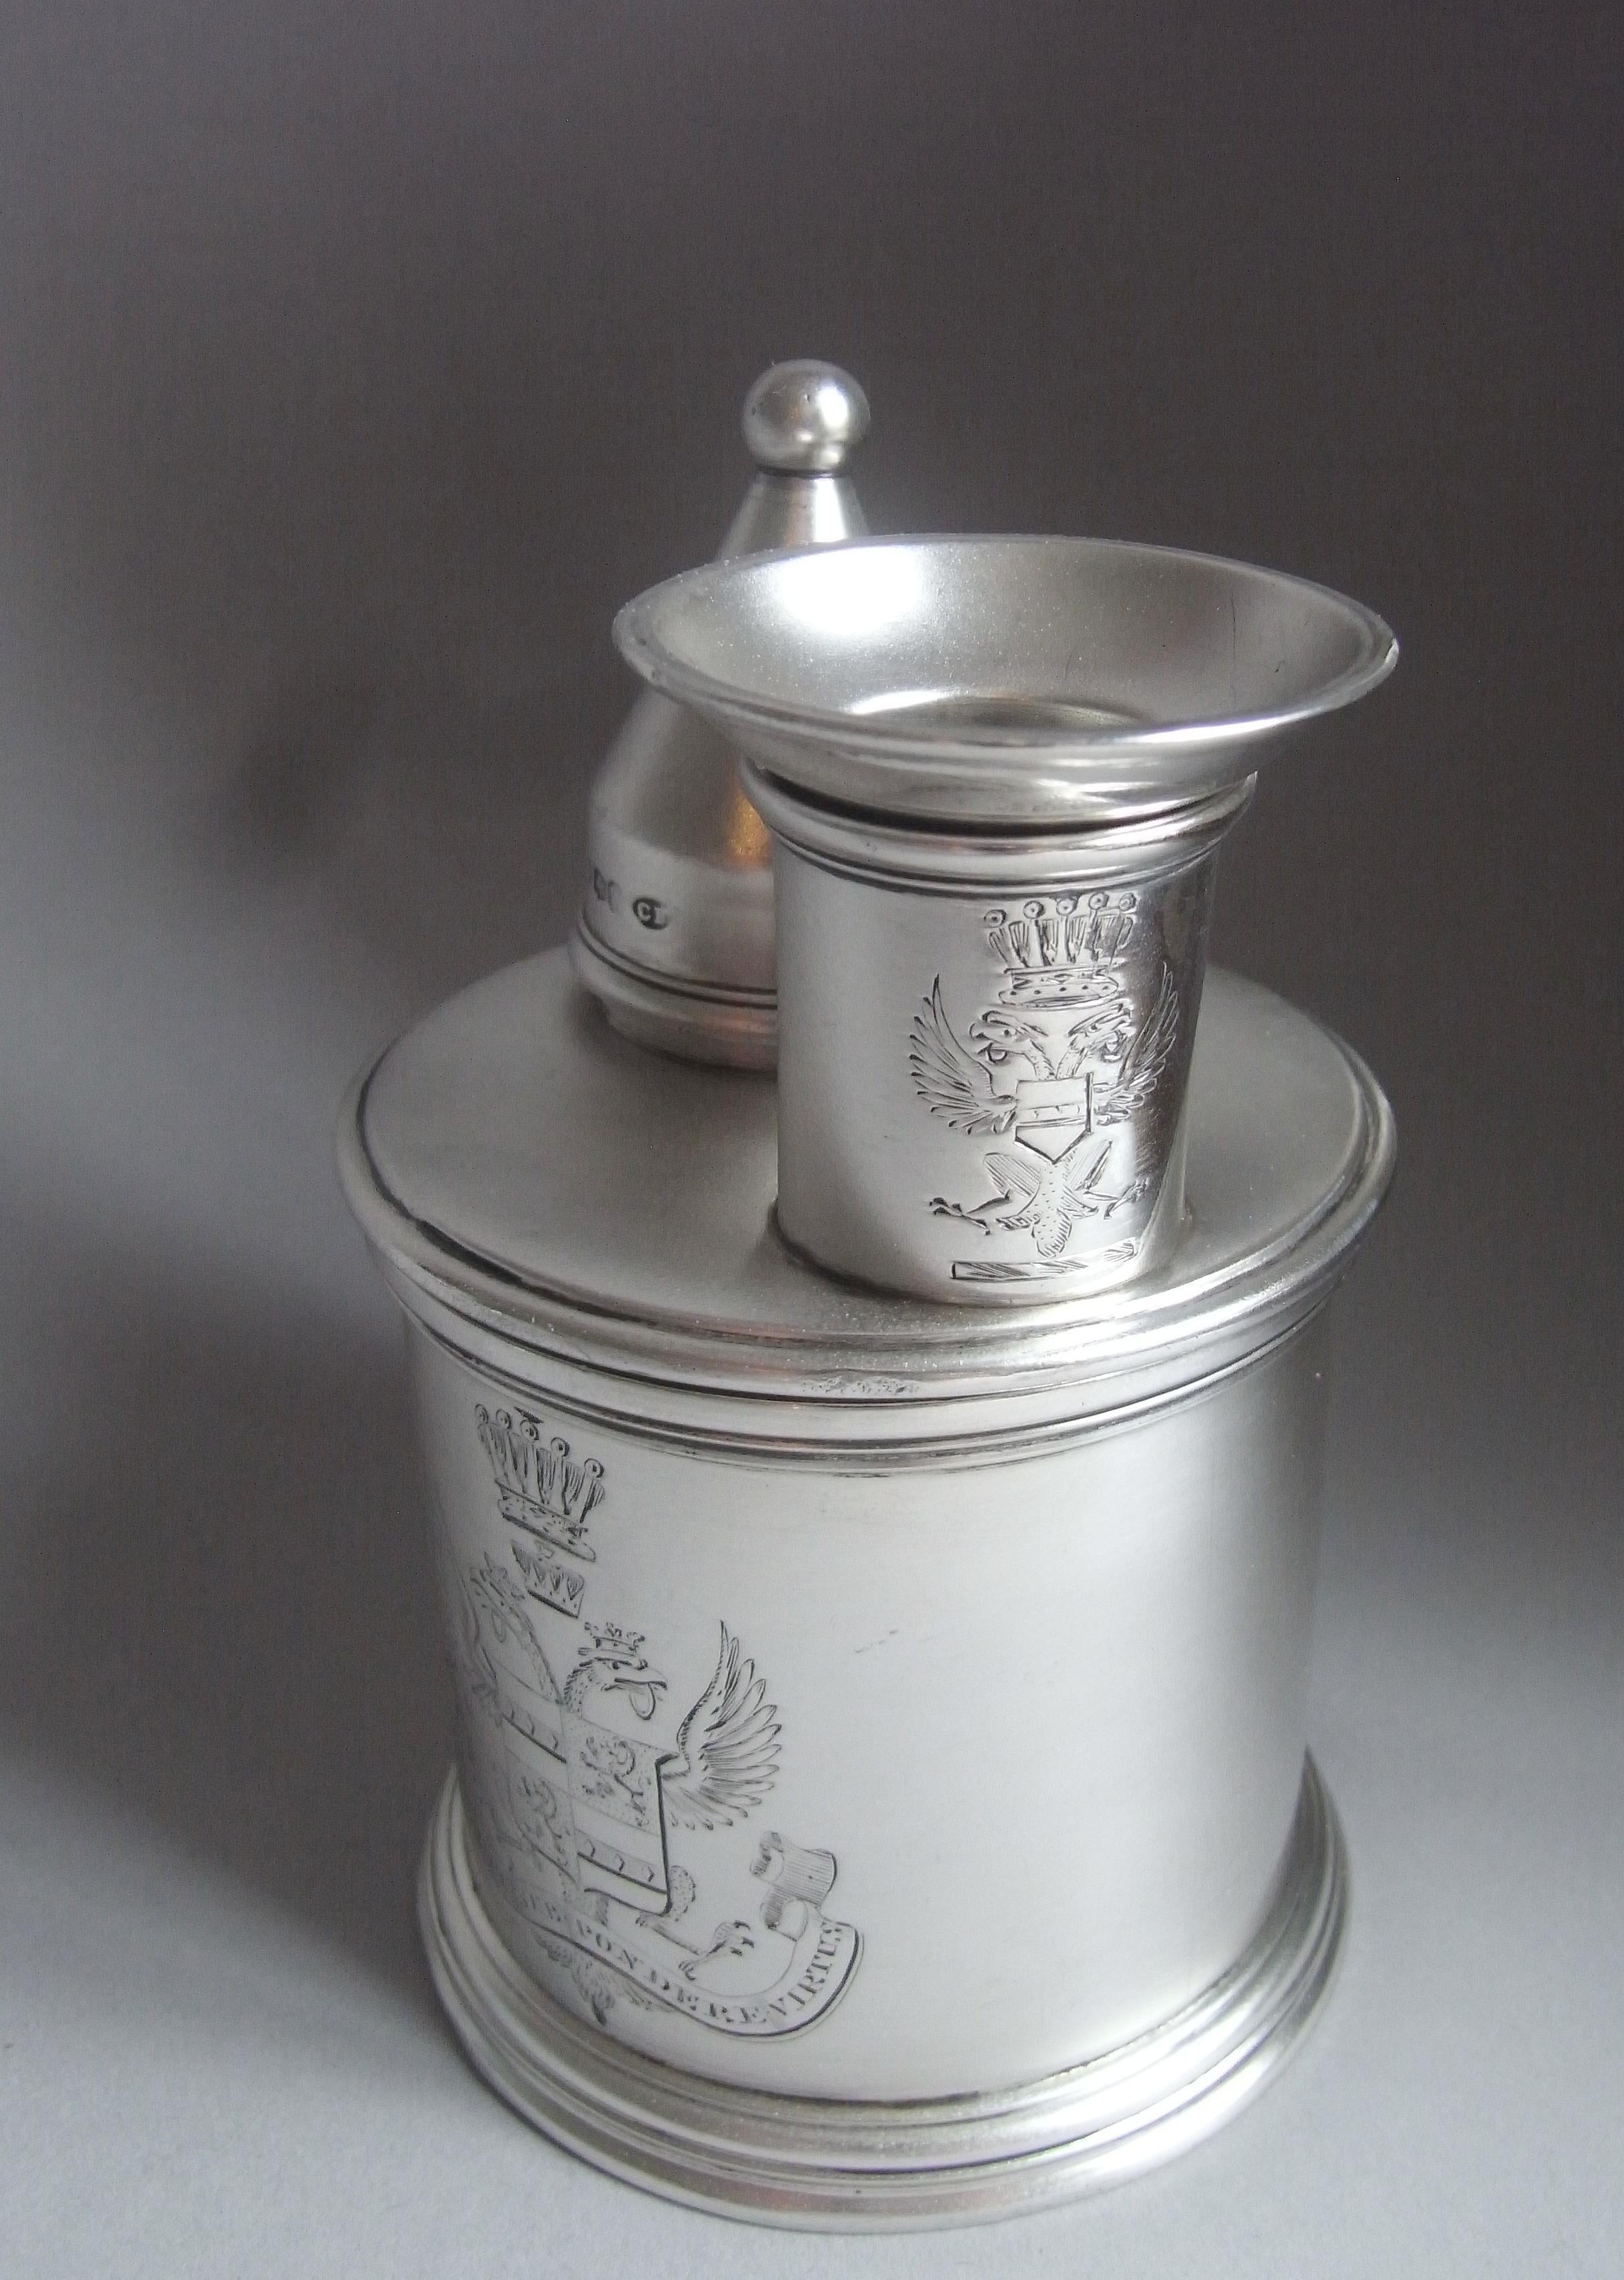 European Royal, An important William IV Inkstand made in London in 1835 by Charles Fox II